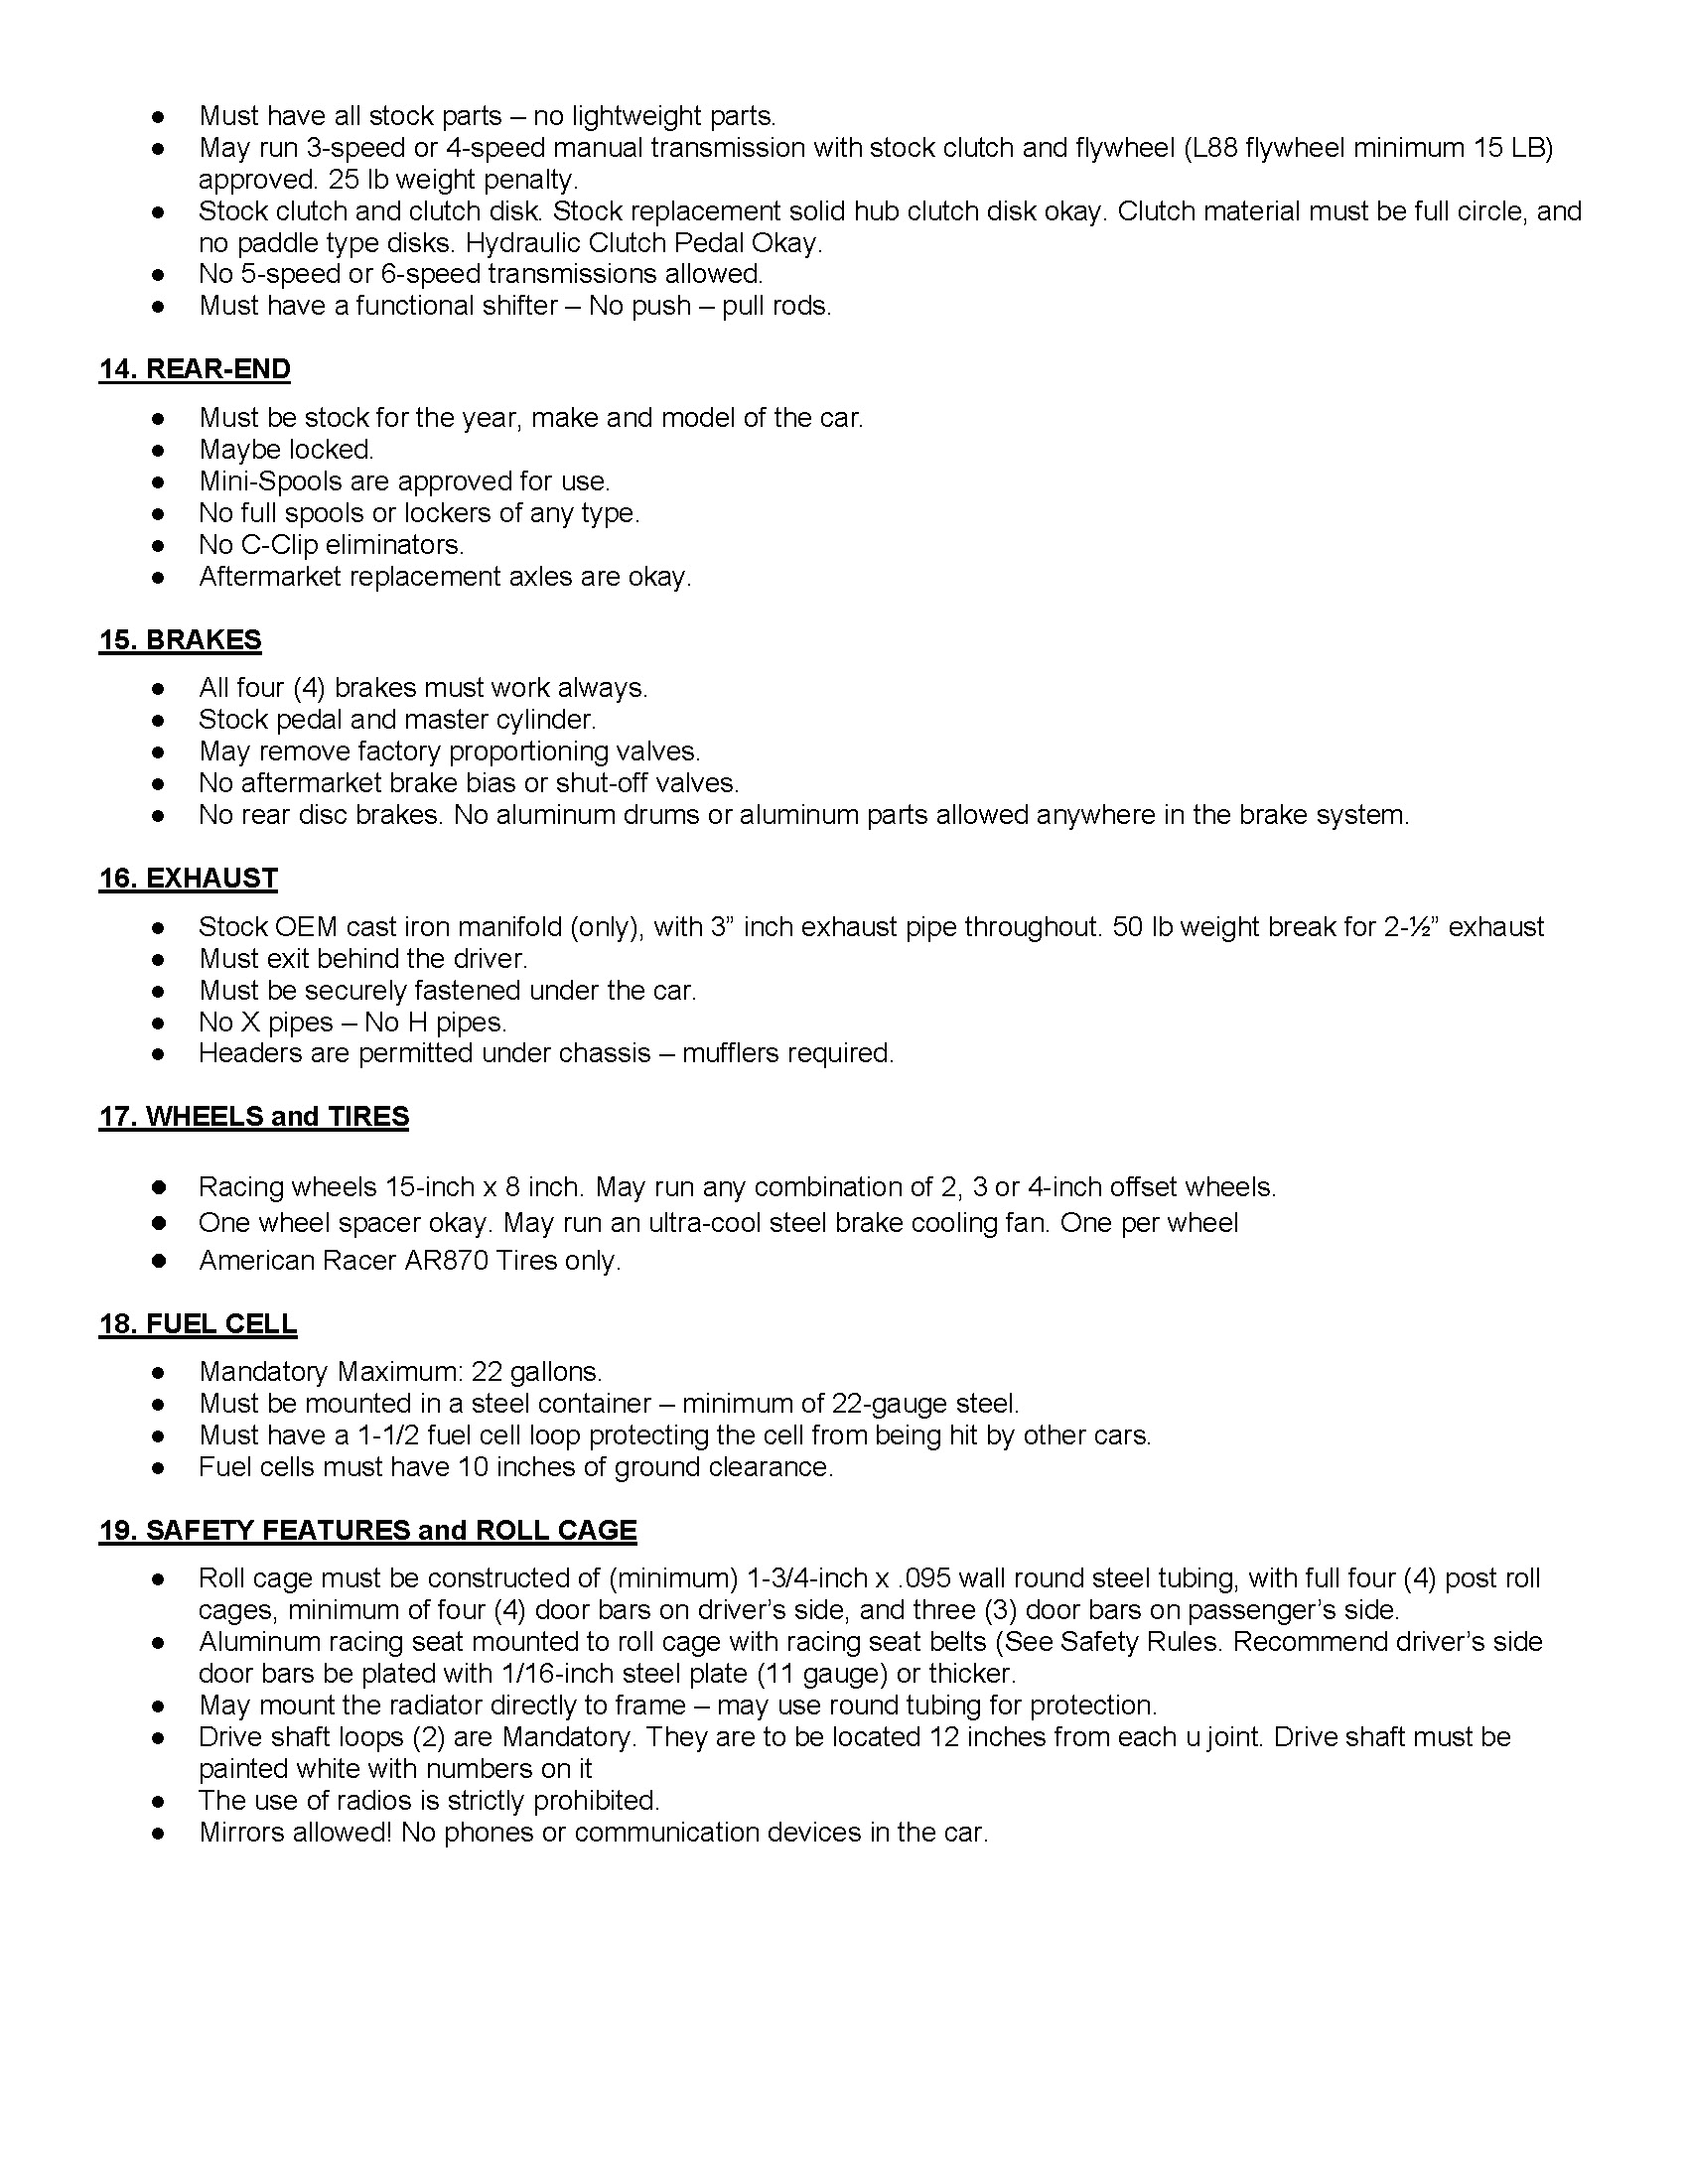 Freedom Factory Pure Stock Rules - Page 4/4